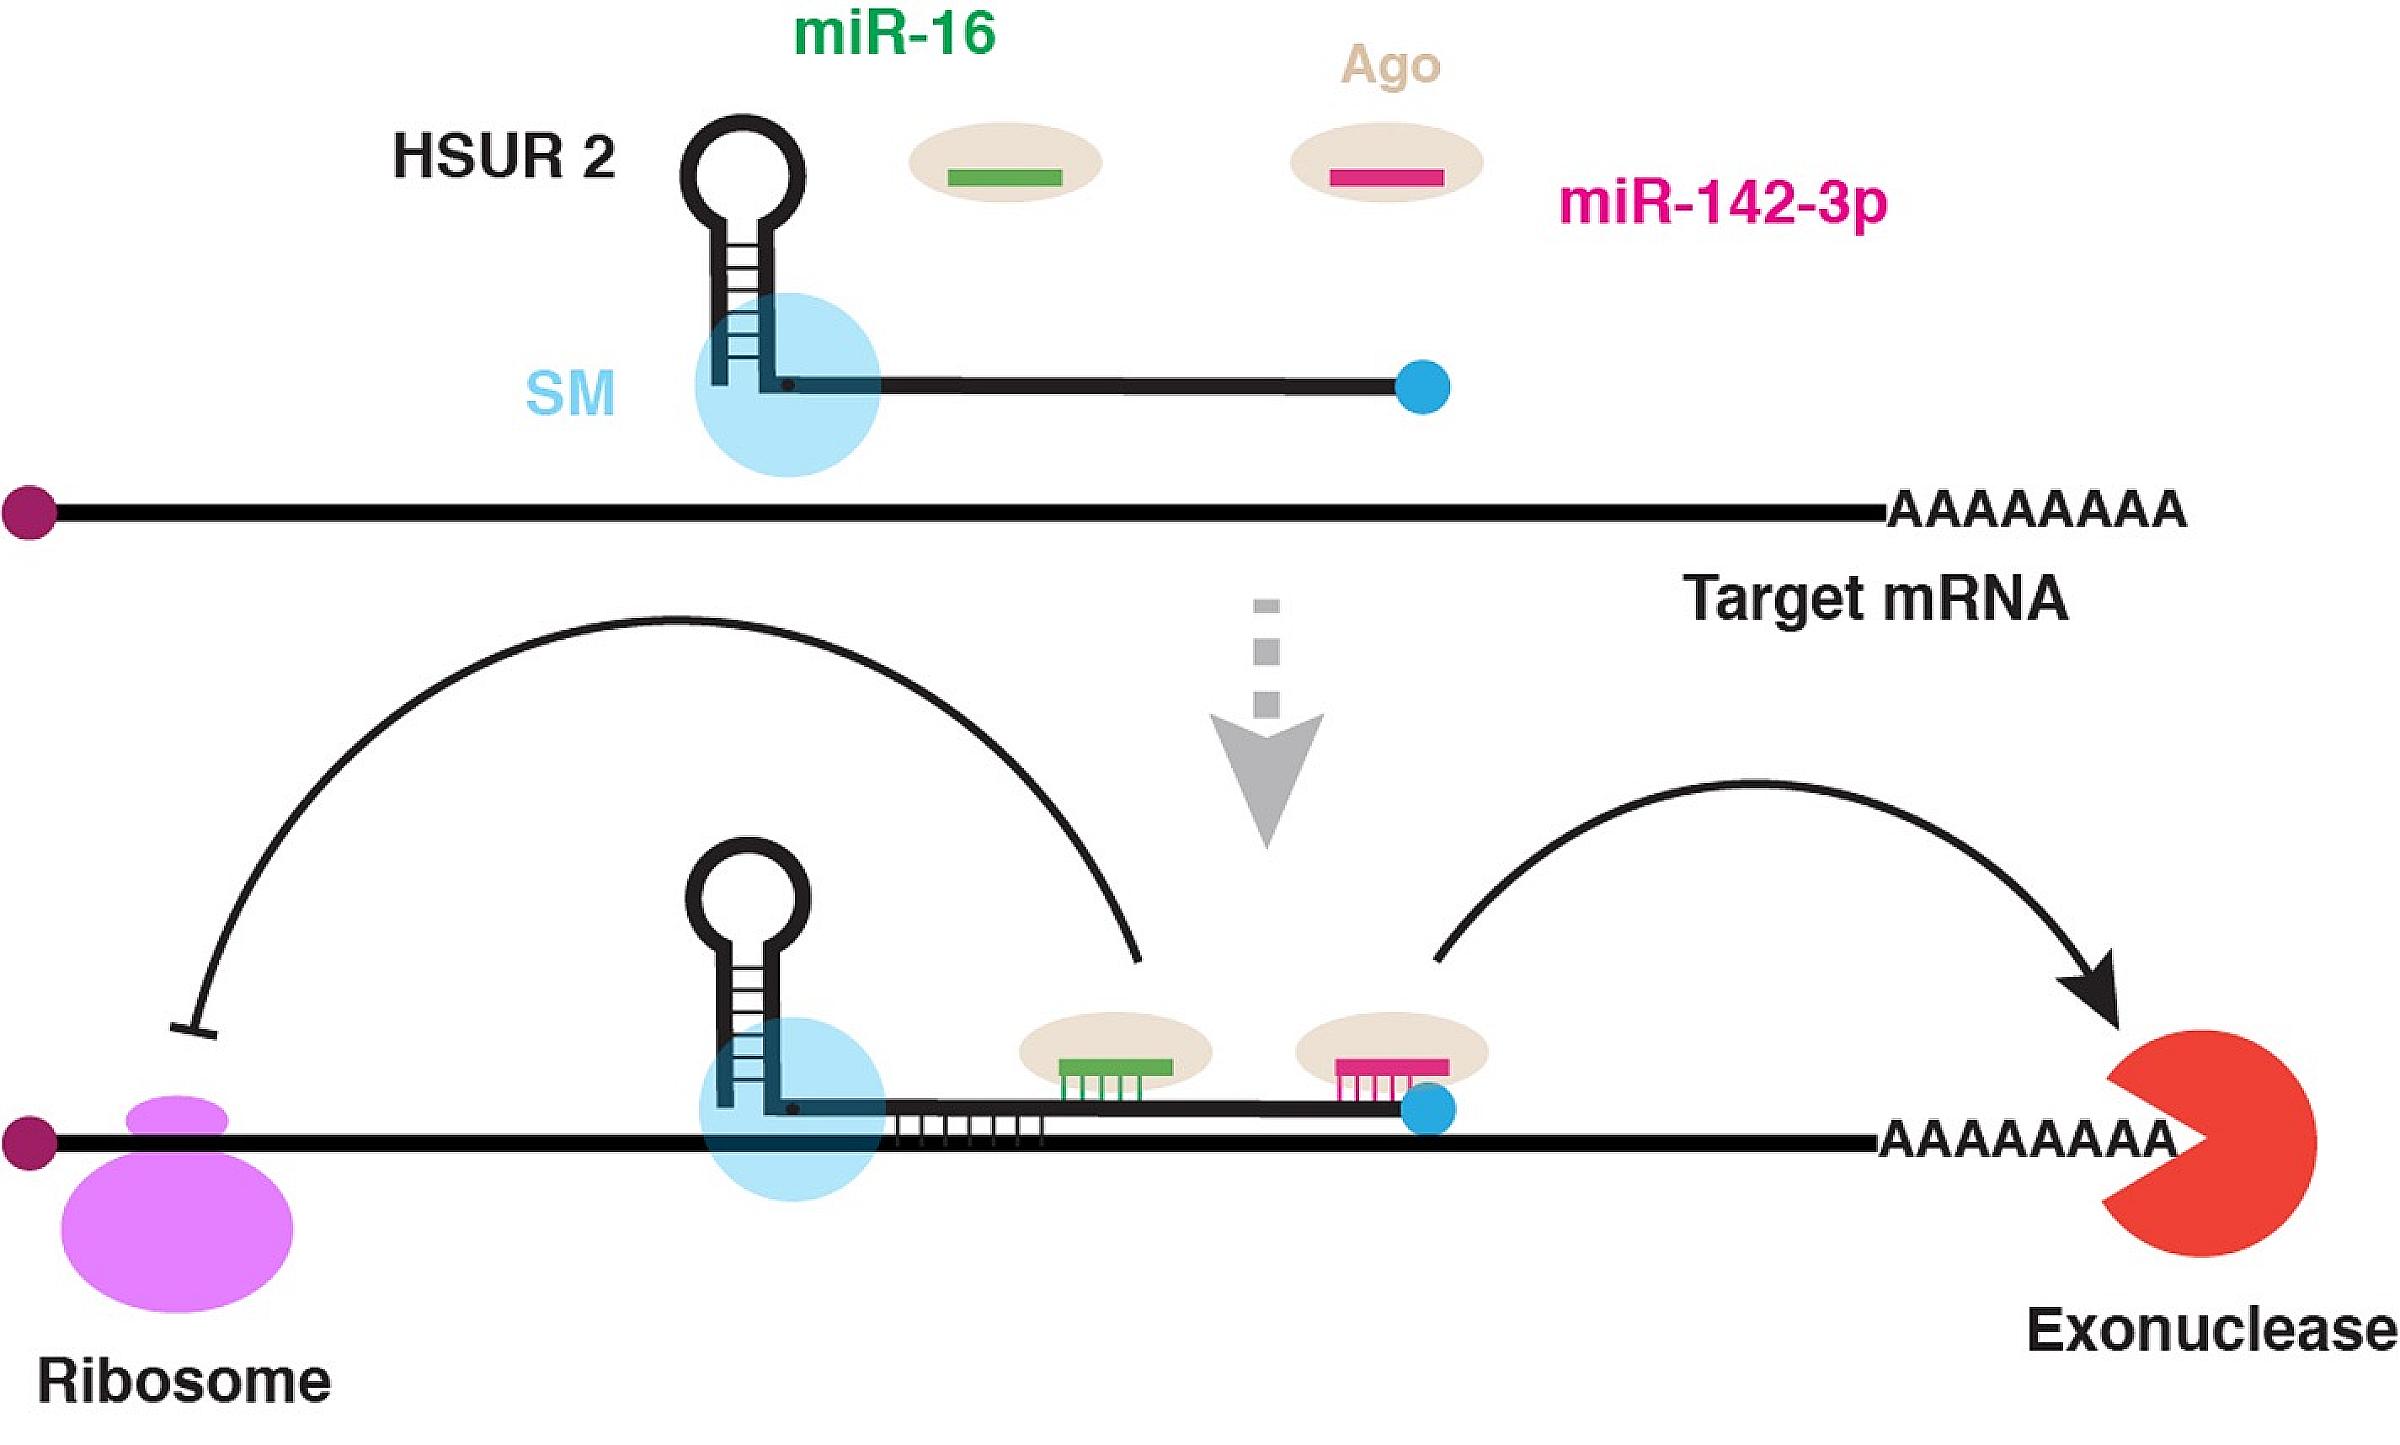 Model of viral HSUR2 RNA function. HSUR2 base-pairs with both host target mRNAs and miRNAs (miR-142-3p and miR-16), tethering them together and inhibiting target mRNA stability and expression.